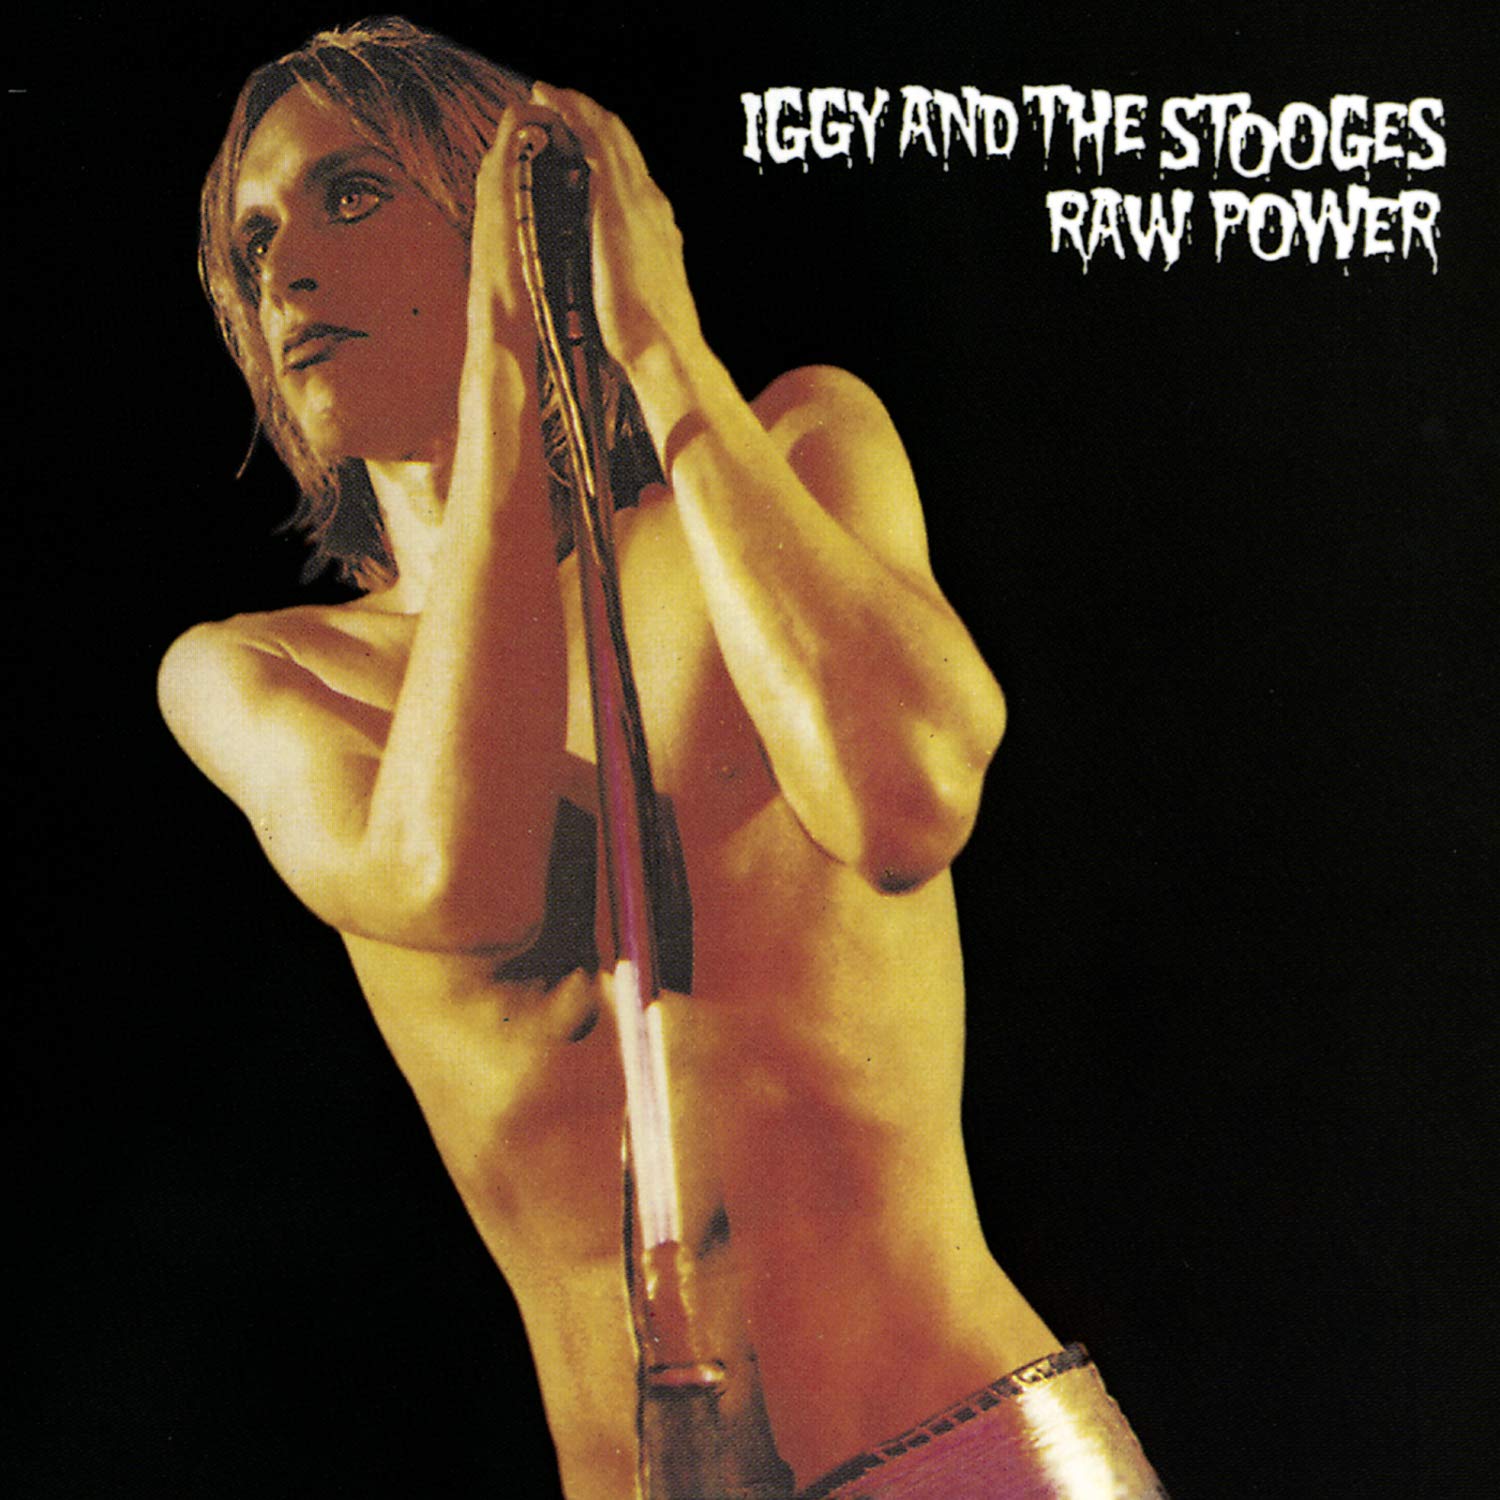 Iggy & The Stooges "Raw Power" 2LP